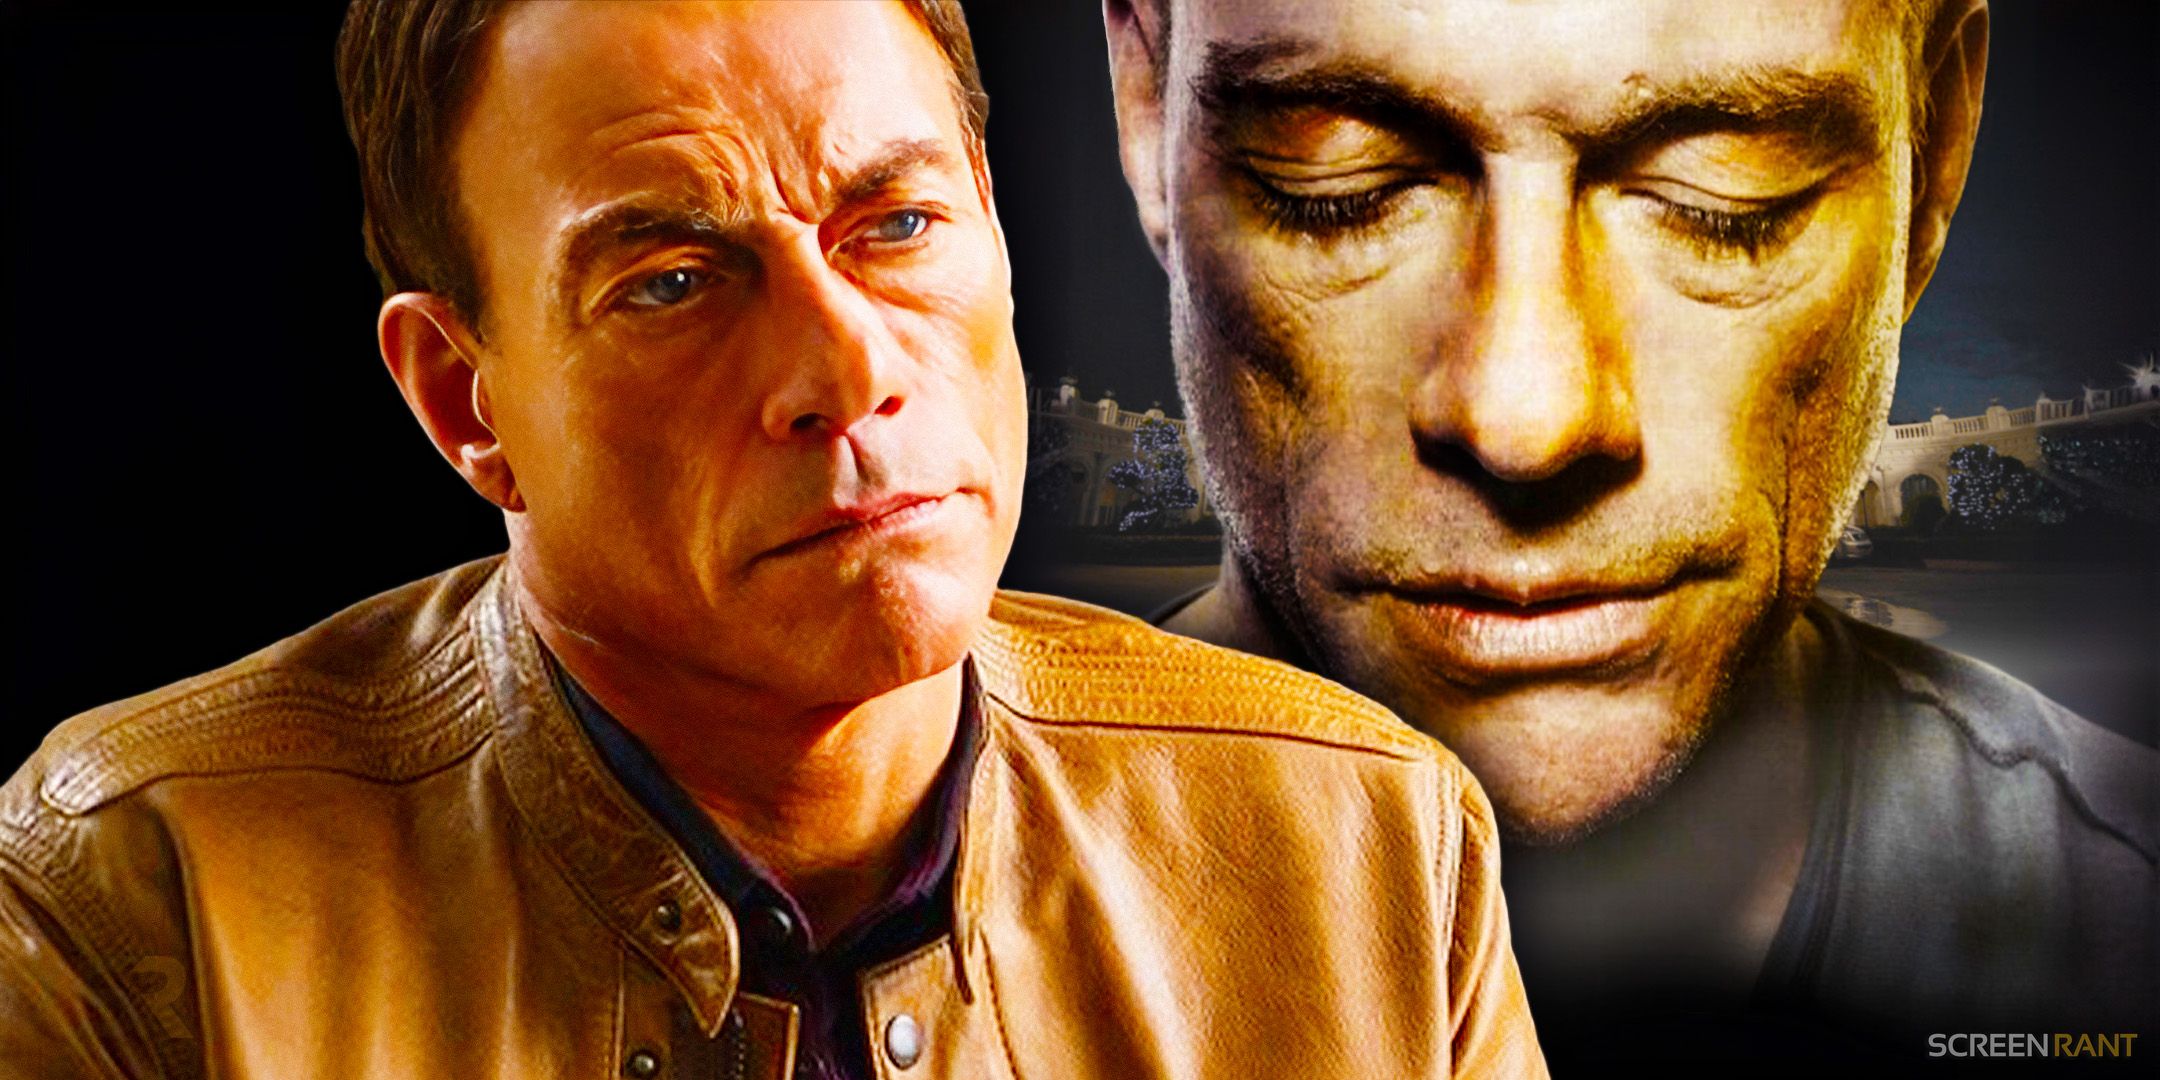 Van Damme on the promo poster for Frenchy (AKA Eagle Path or Full Love) with Van Damme from Amazon's Jean-Claude Van Johnson